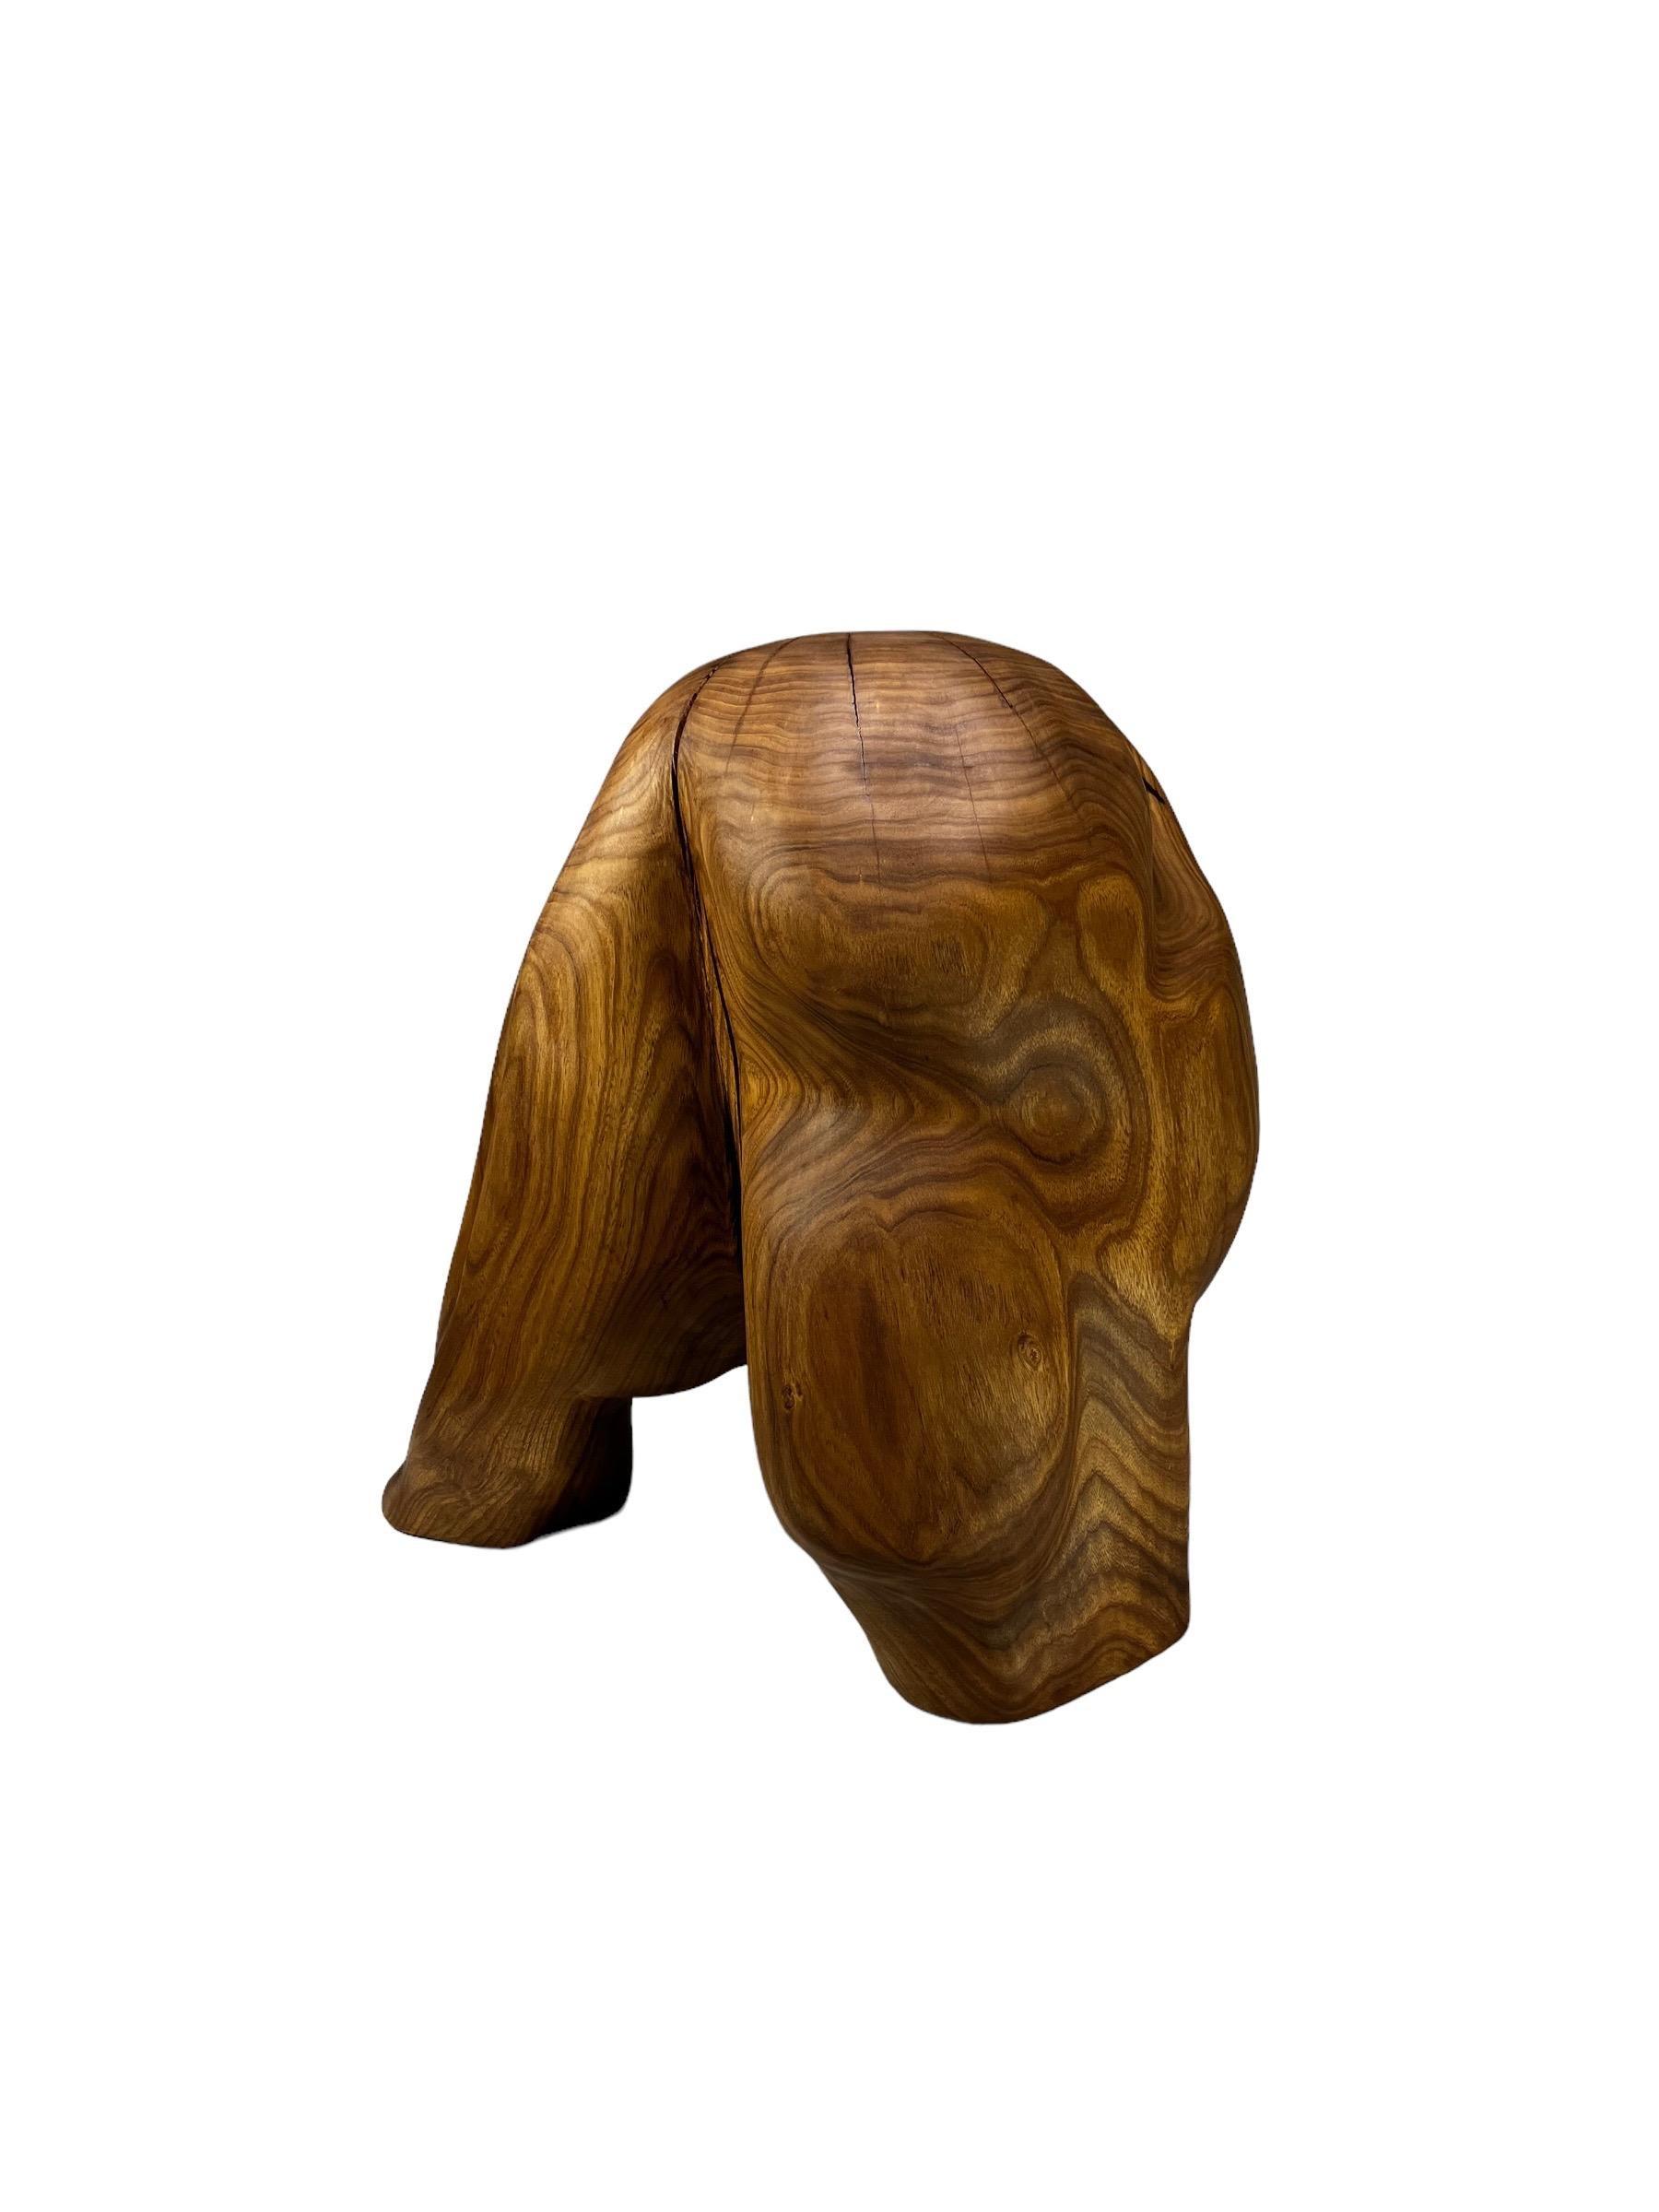 Carved wooden stool, from an unusually large piece of golden rain tree that is locally sourced in Sweden. Shaped by hand to a smooth silky surface by master Swedish woodmaker ELAKFORM.
Oiled with a natural linseed-oil.
ELAKFORM work with furniture